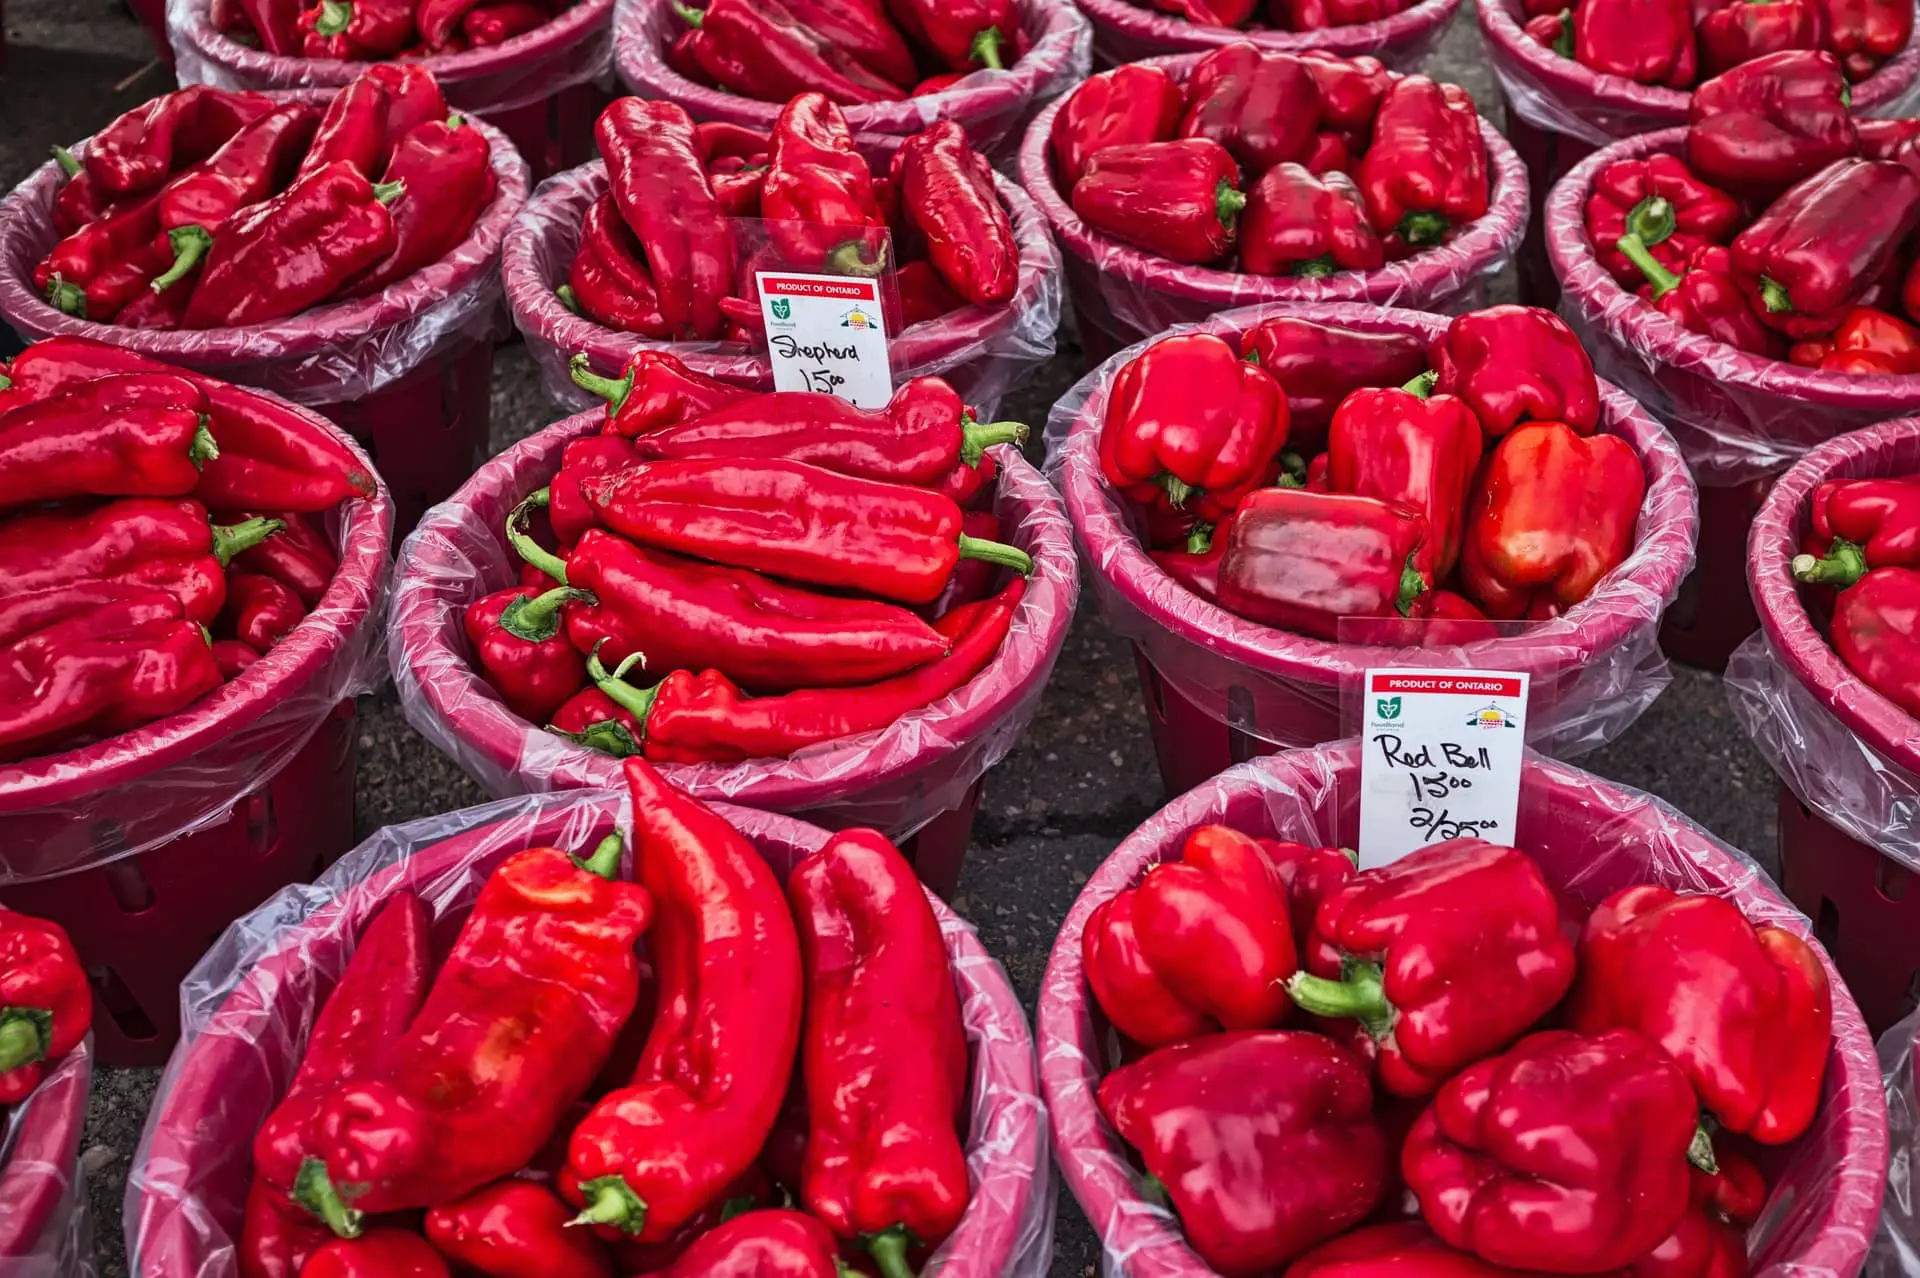 Red peppers at a market